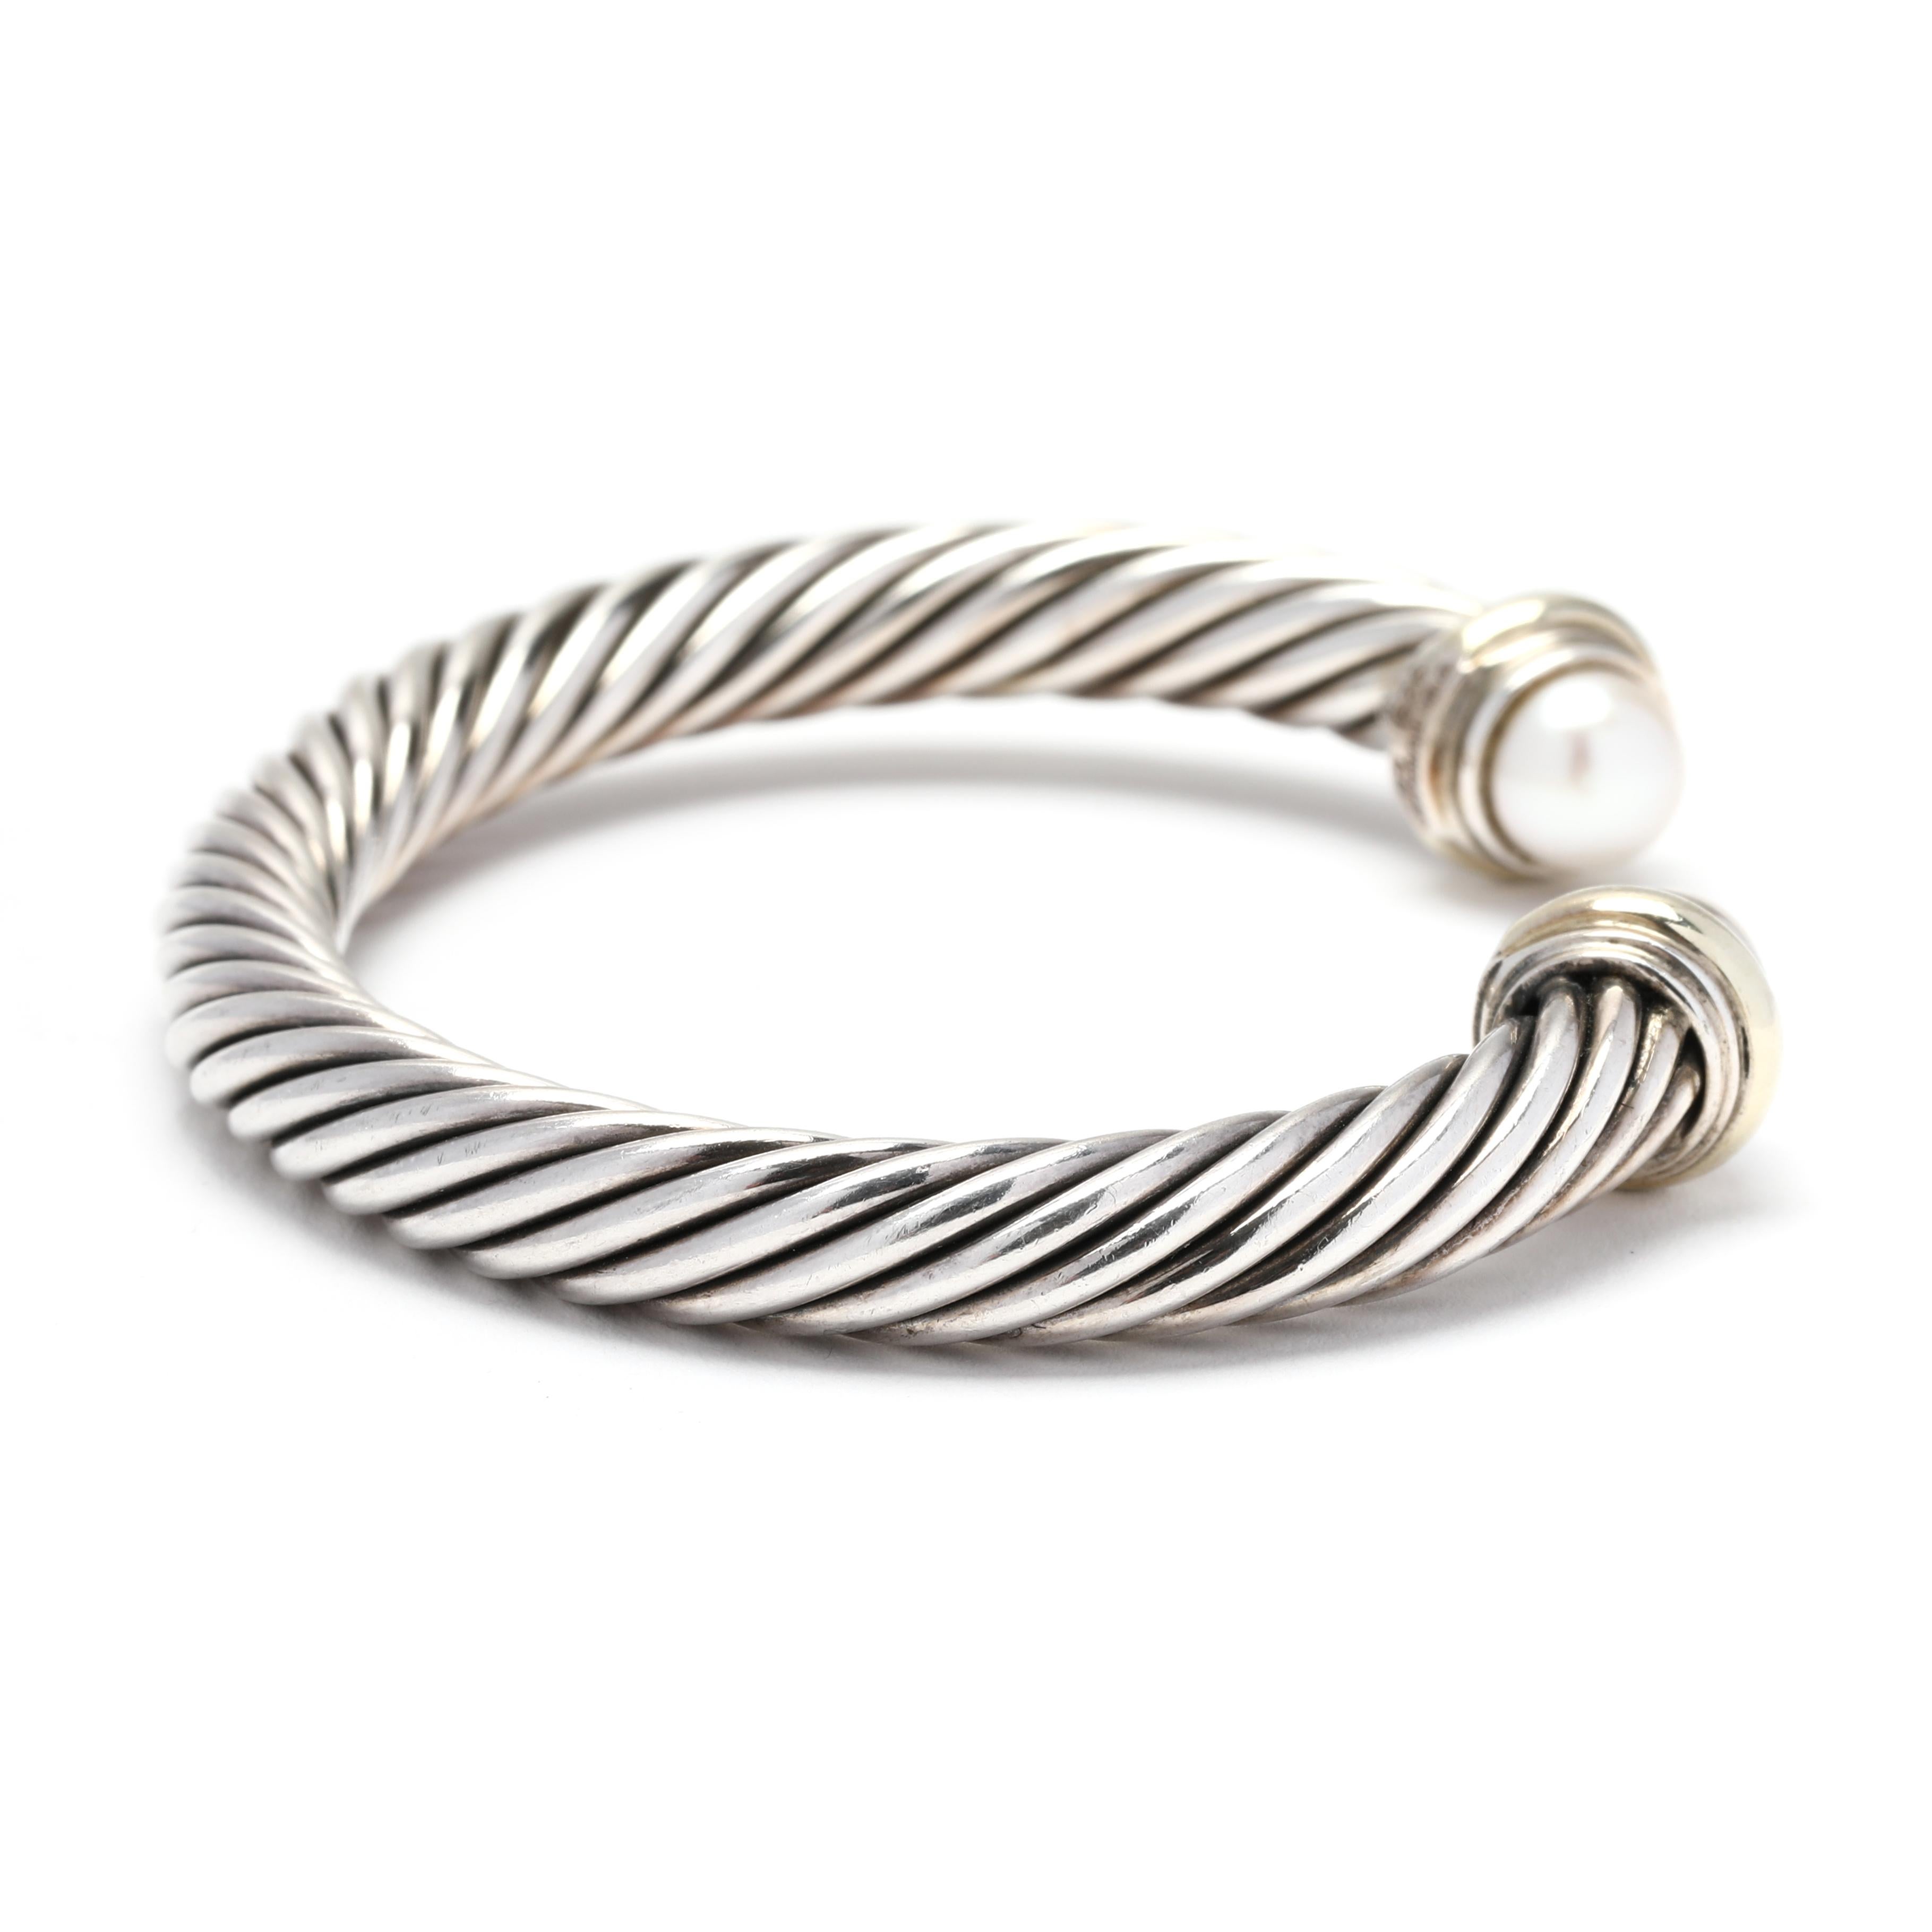 The David Yurman 7mm Pearl Cuff Bracelet is a gorgeous piece of jewelry that combines the elegance of pearls with the modernity of cable cuff design. Made from 14K yellow gold and sterling silver, this bracelet is of high-quality and will last for